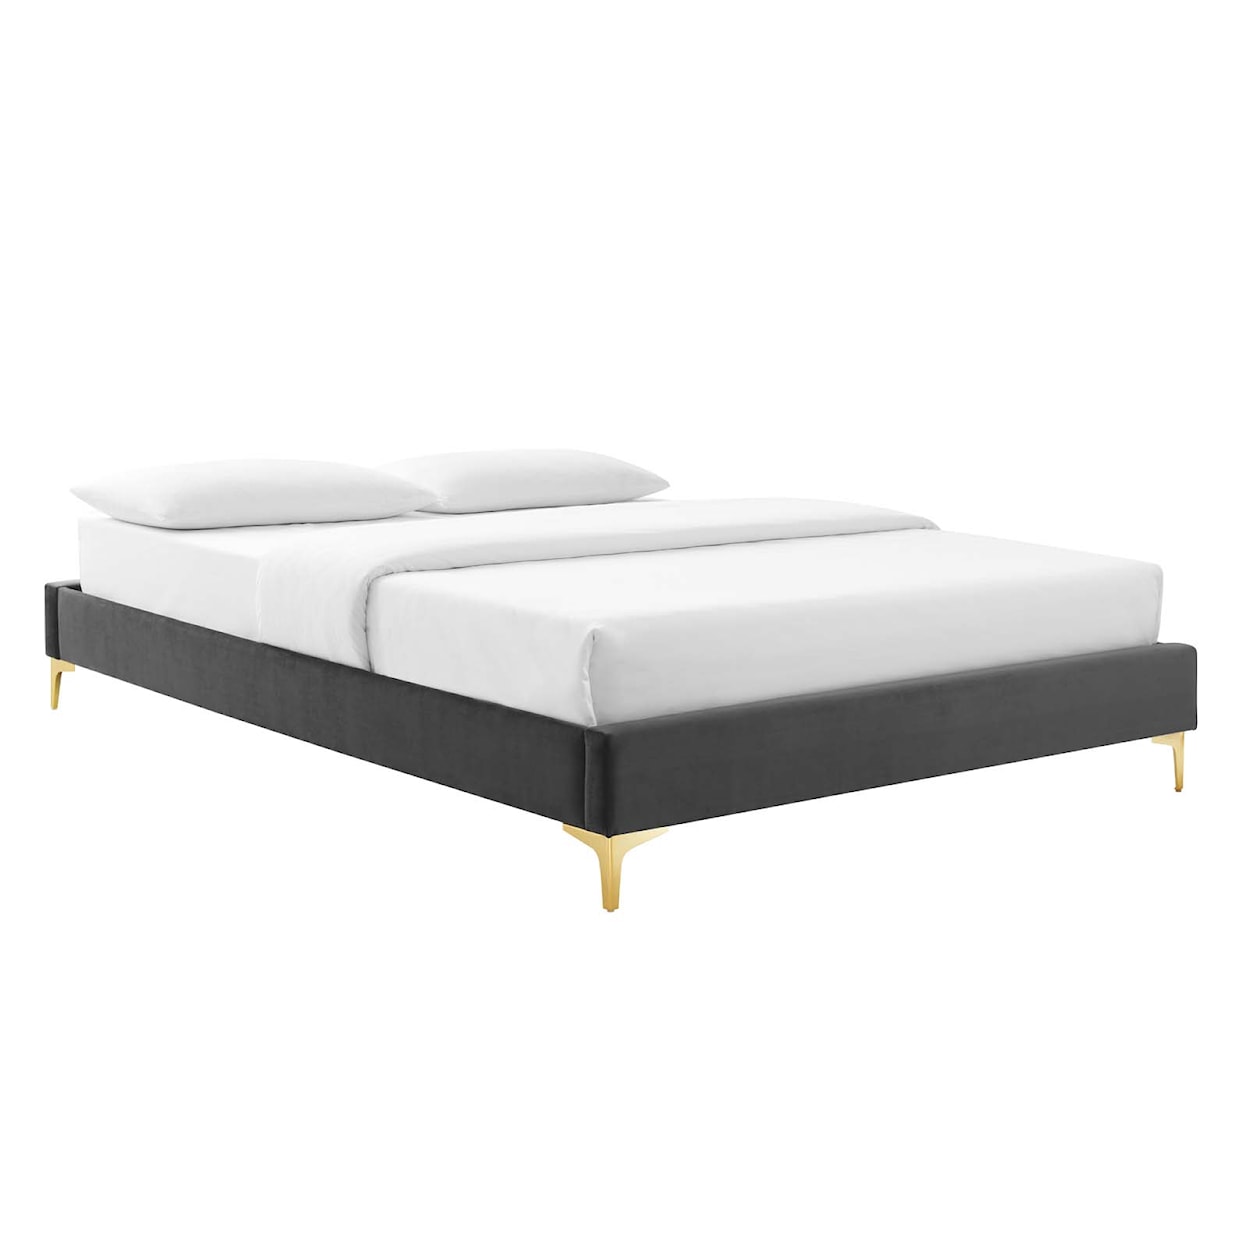 Modway Sutton Twin Bed Frame